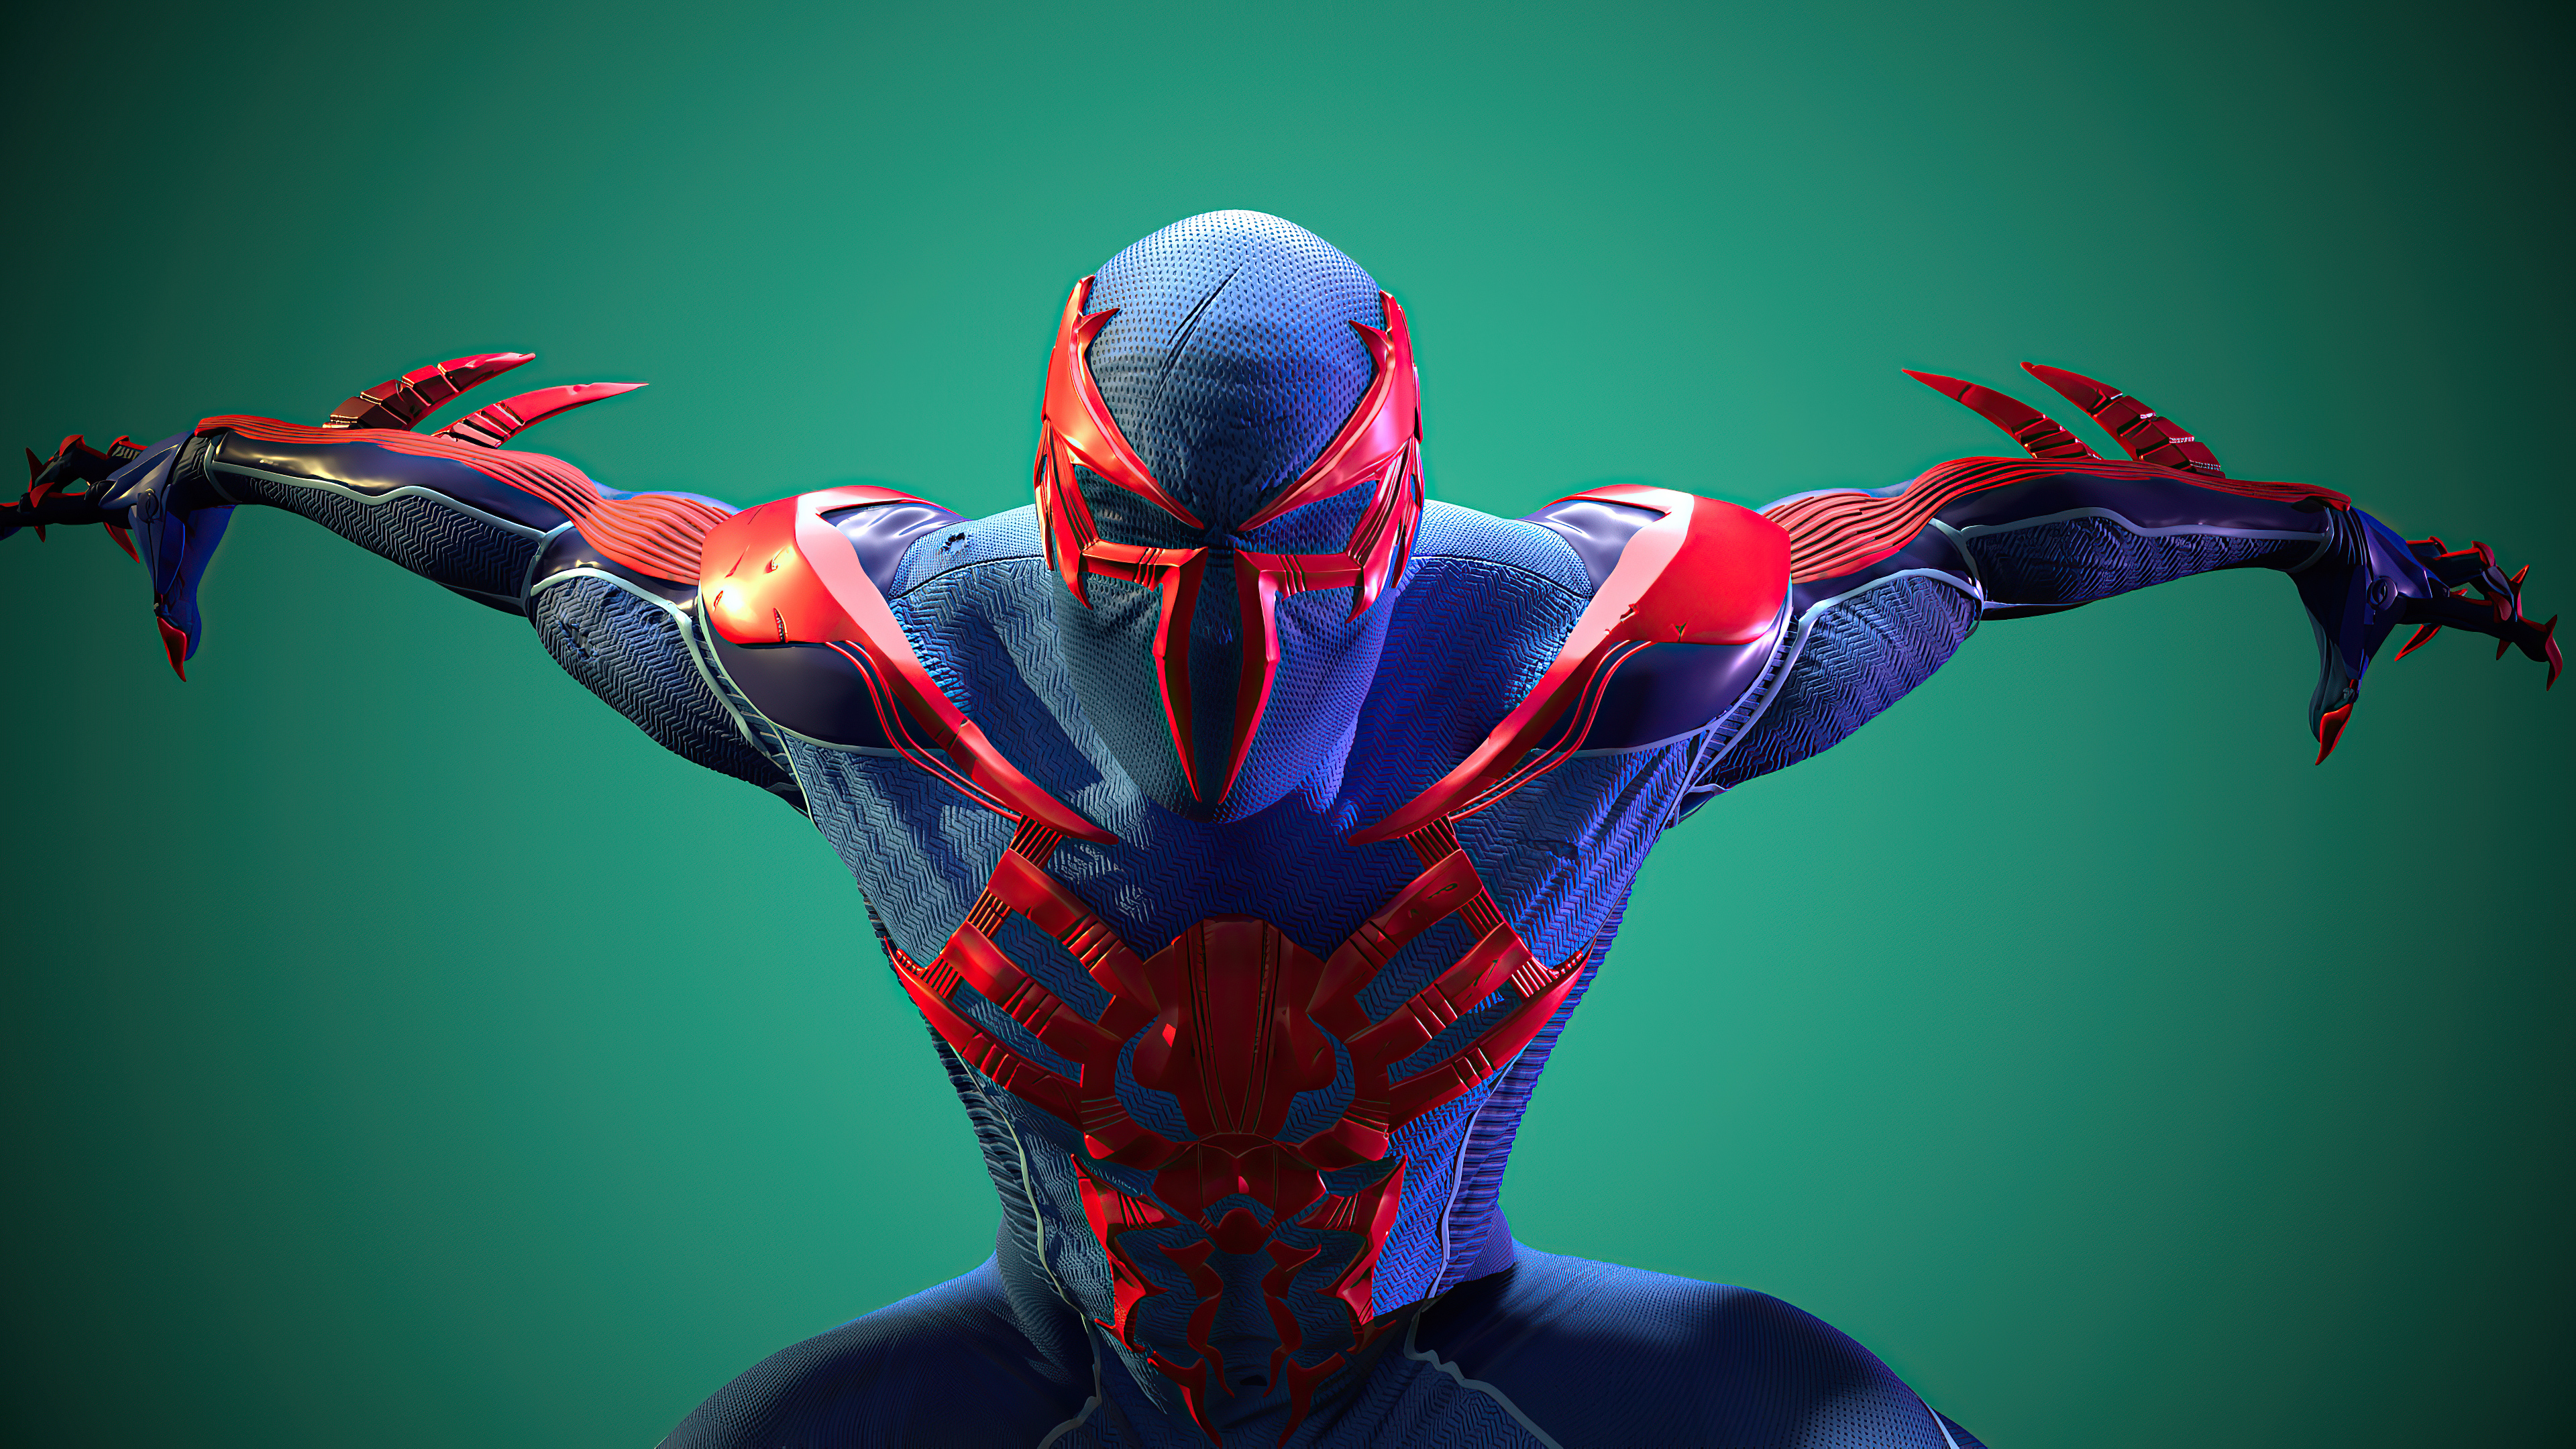 3840x2160 Spider Man 2099 4k Art, HD Superheroes, 4k Wallpapers, Images, Backgrounds, Photos and Pictures